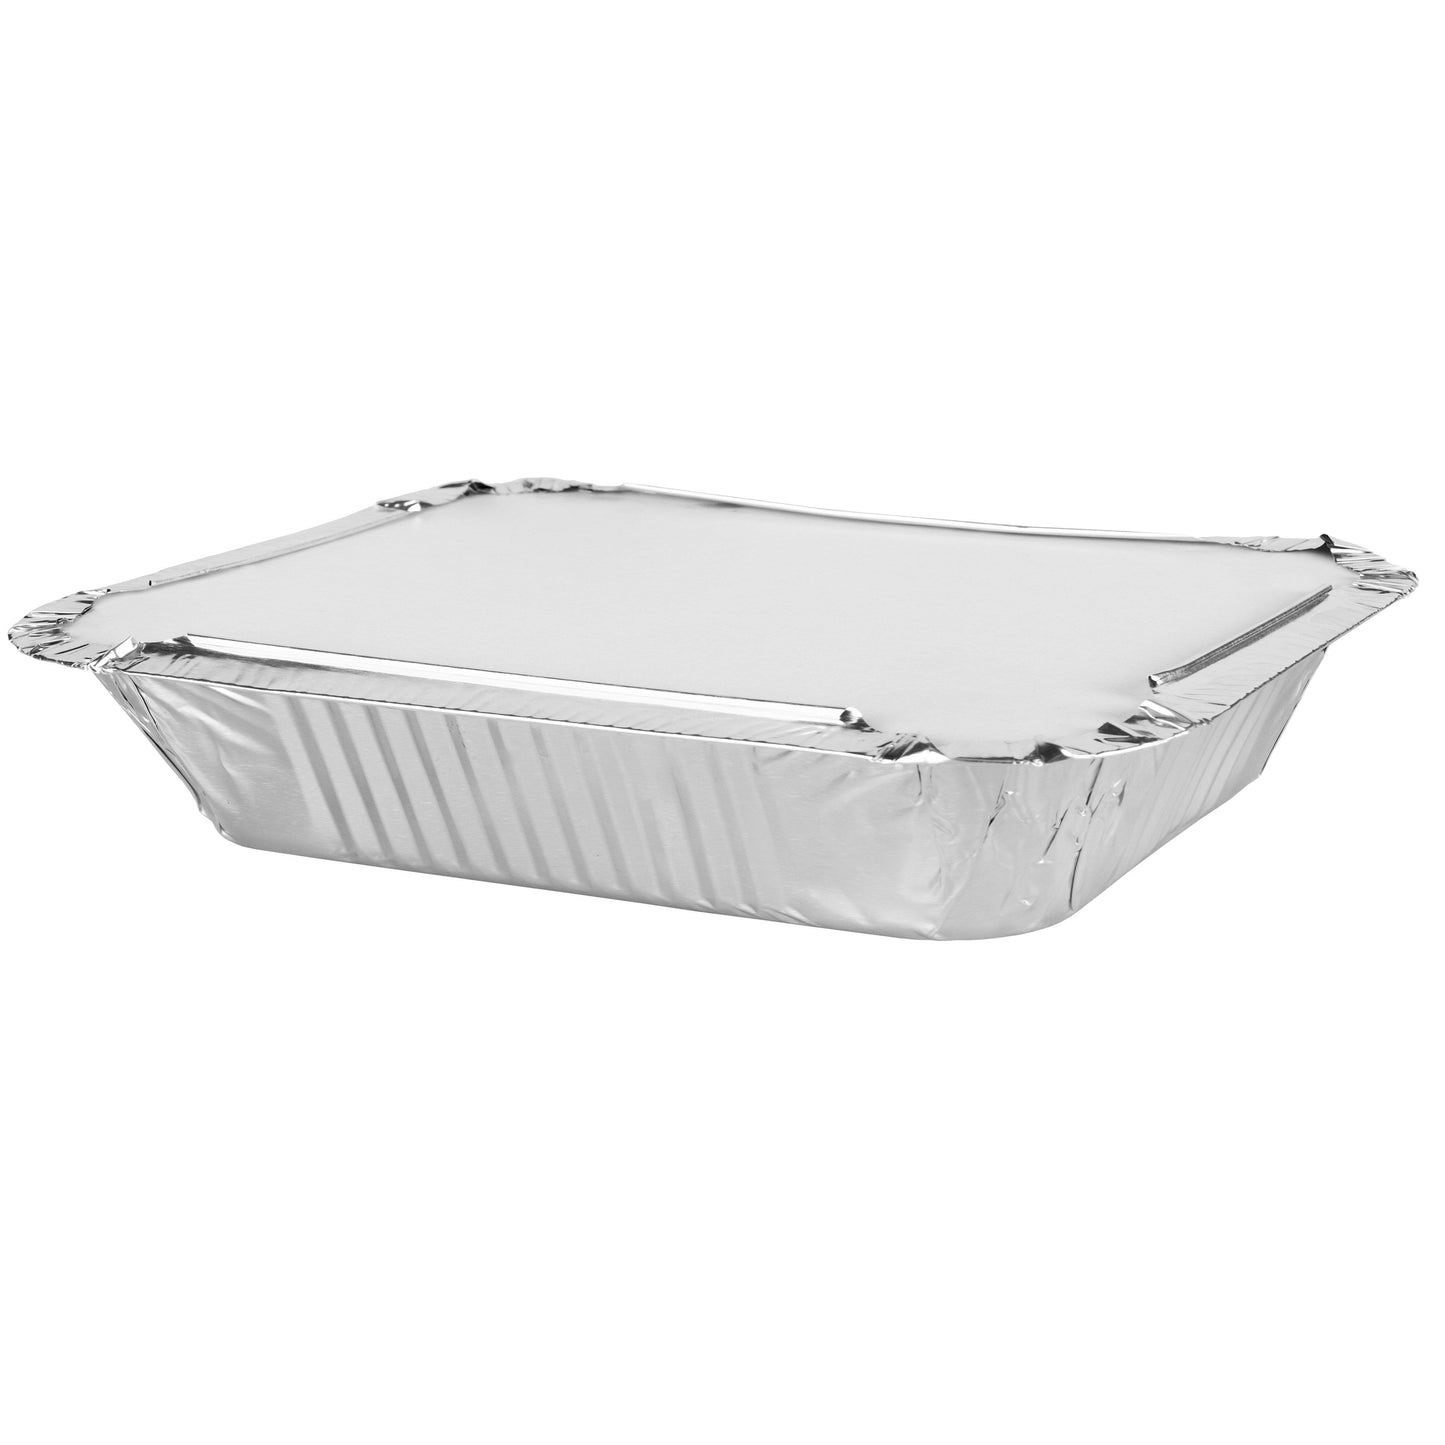 Aluminium Foil Food Roasting Tray with Lids Pack of 2 0263 (Parcel Rate)